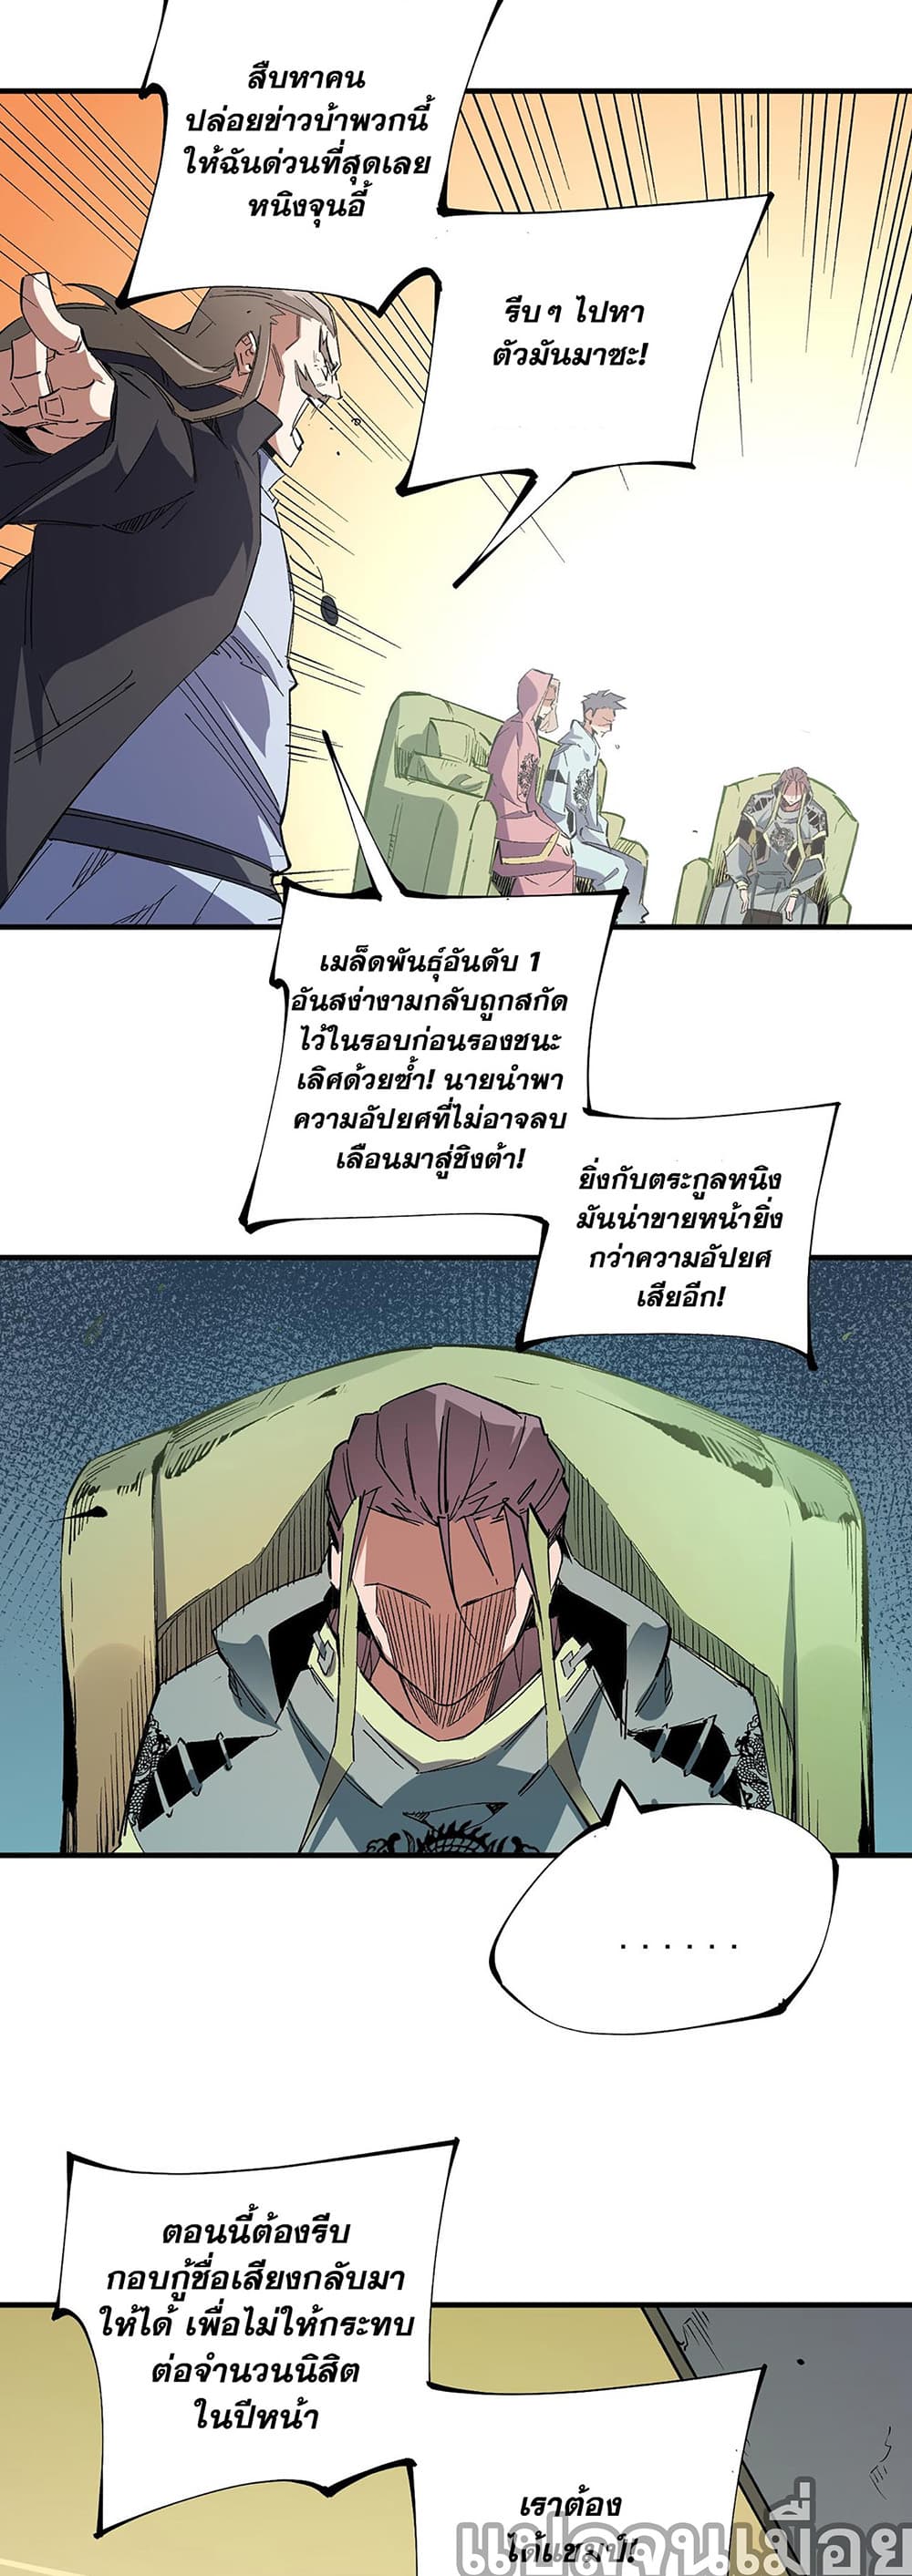 Job Changing for the Entire Population: The Jobless Me Will Terminate the Gods ฉันคือผู้เล่นไร้อาชีพที่สังหารเหล่าเทพ 34-34